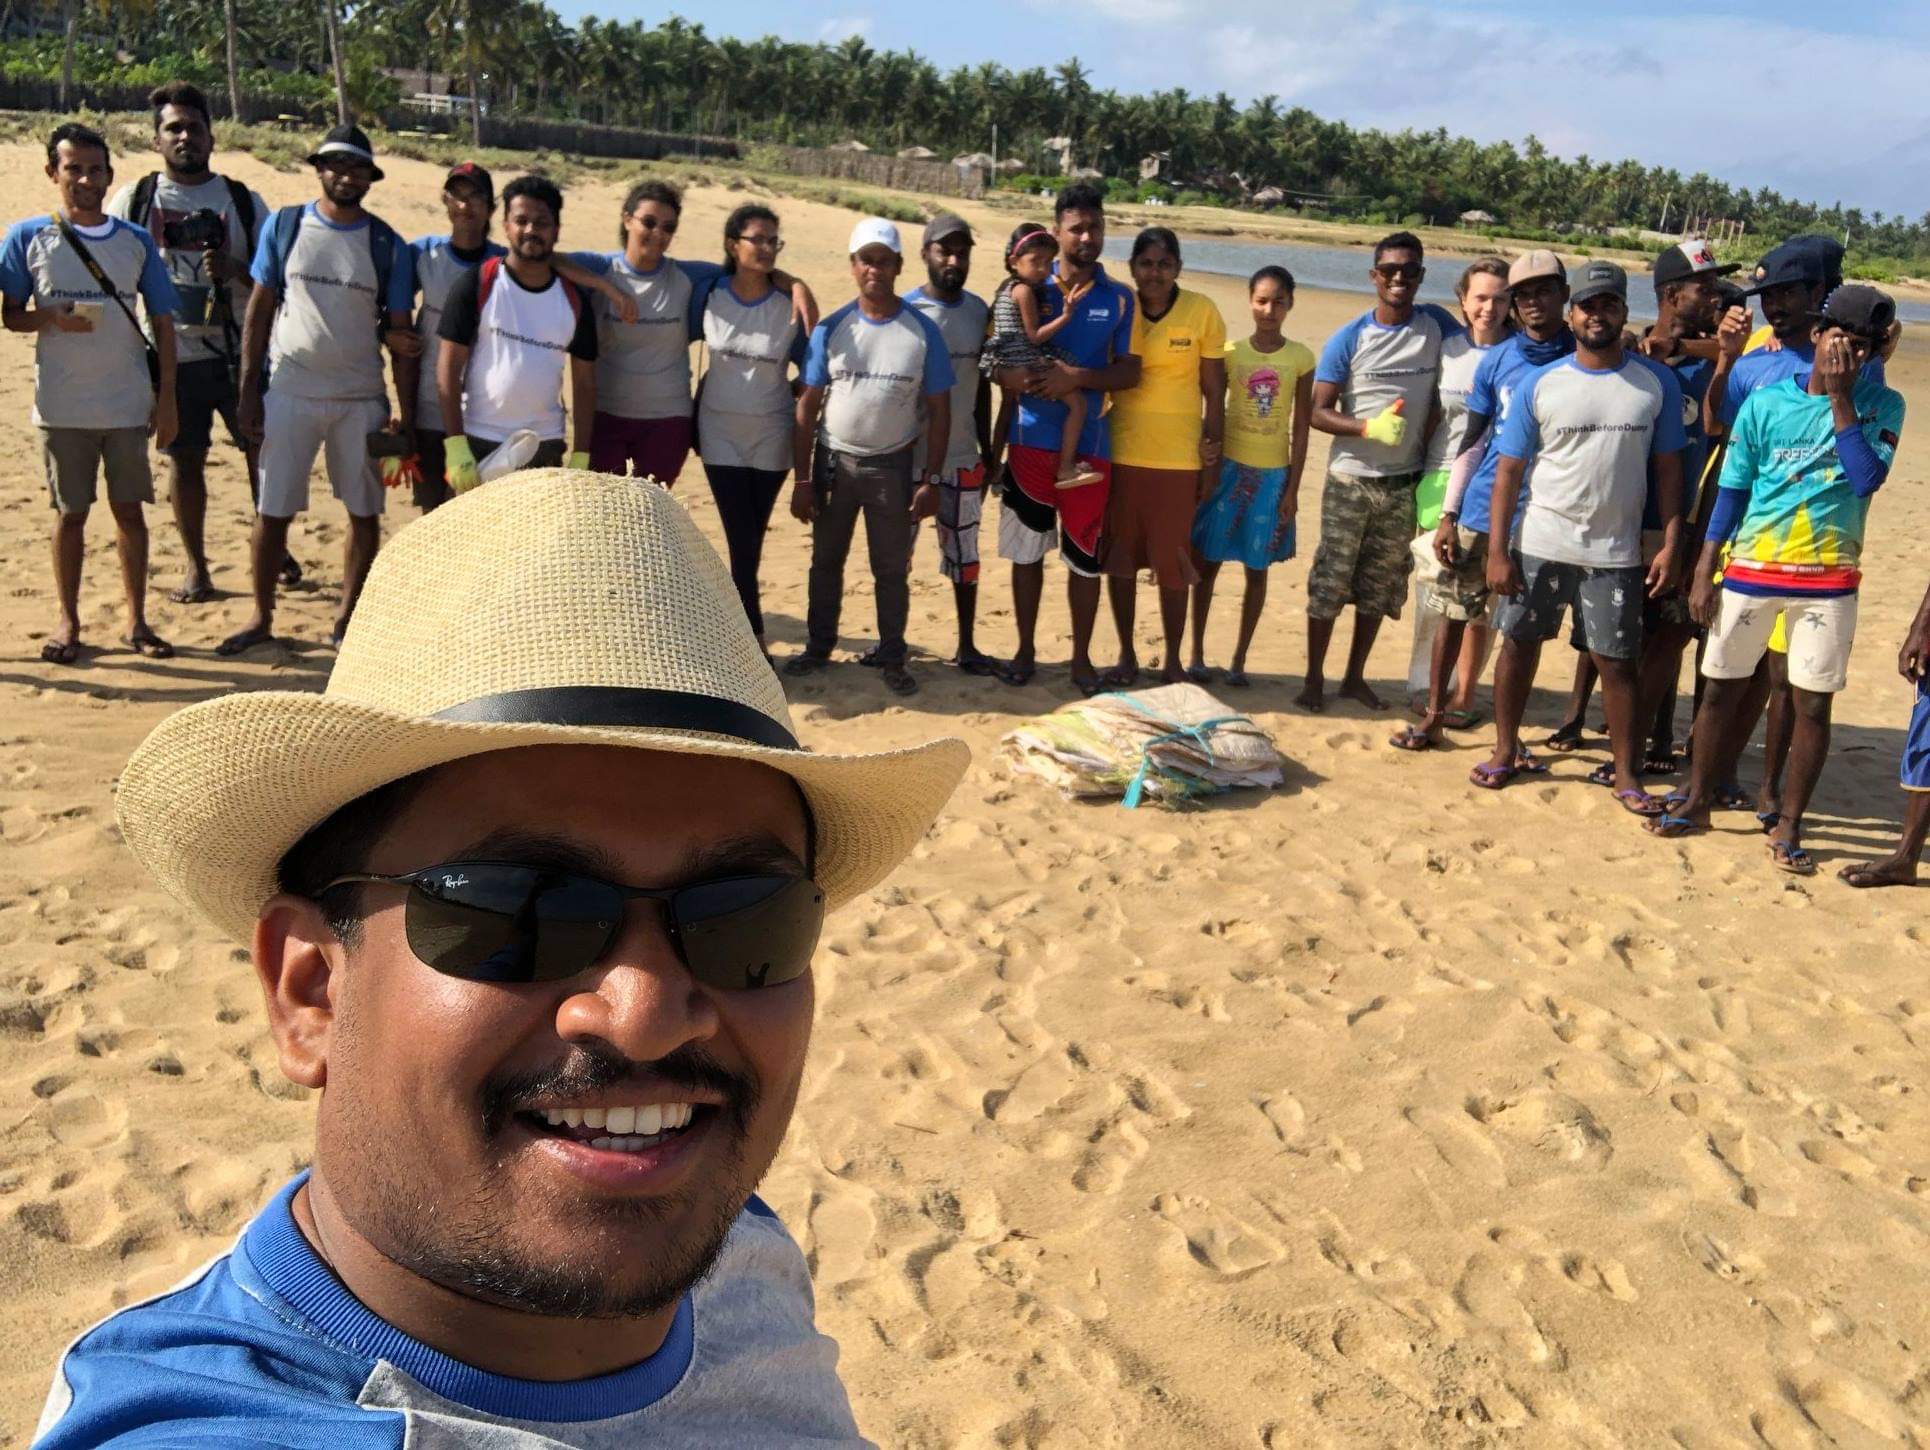 365X is a start-up working in the development and enhancement of the scalability of system software. Conducted by 365X as a CSR project, the cleanup was a laudable initiative. The mass beach cleaning campaign was carried out around the island including in Negombo, Jaffna, Matara, and Mount Lavinia.